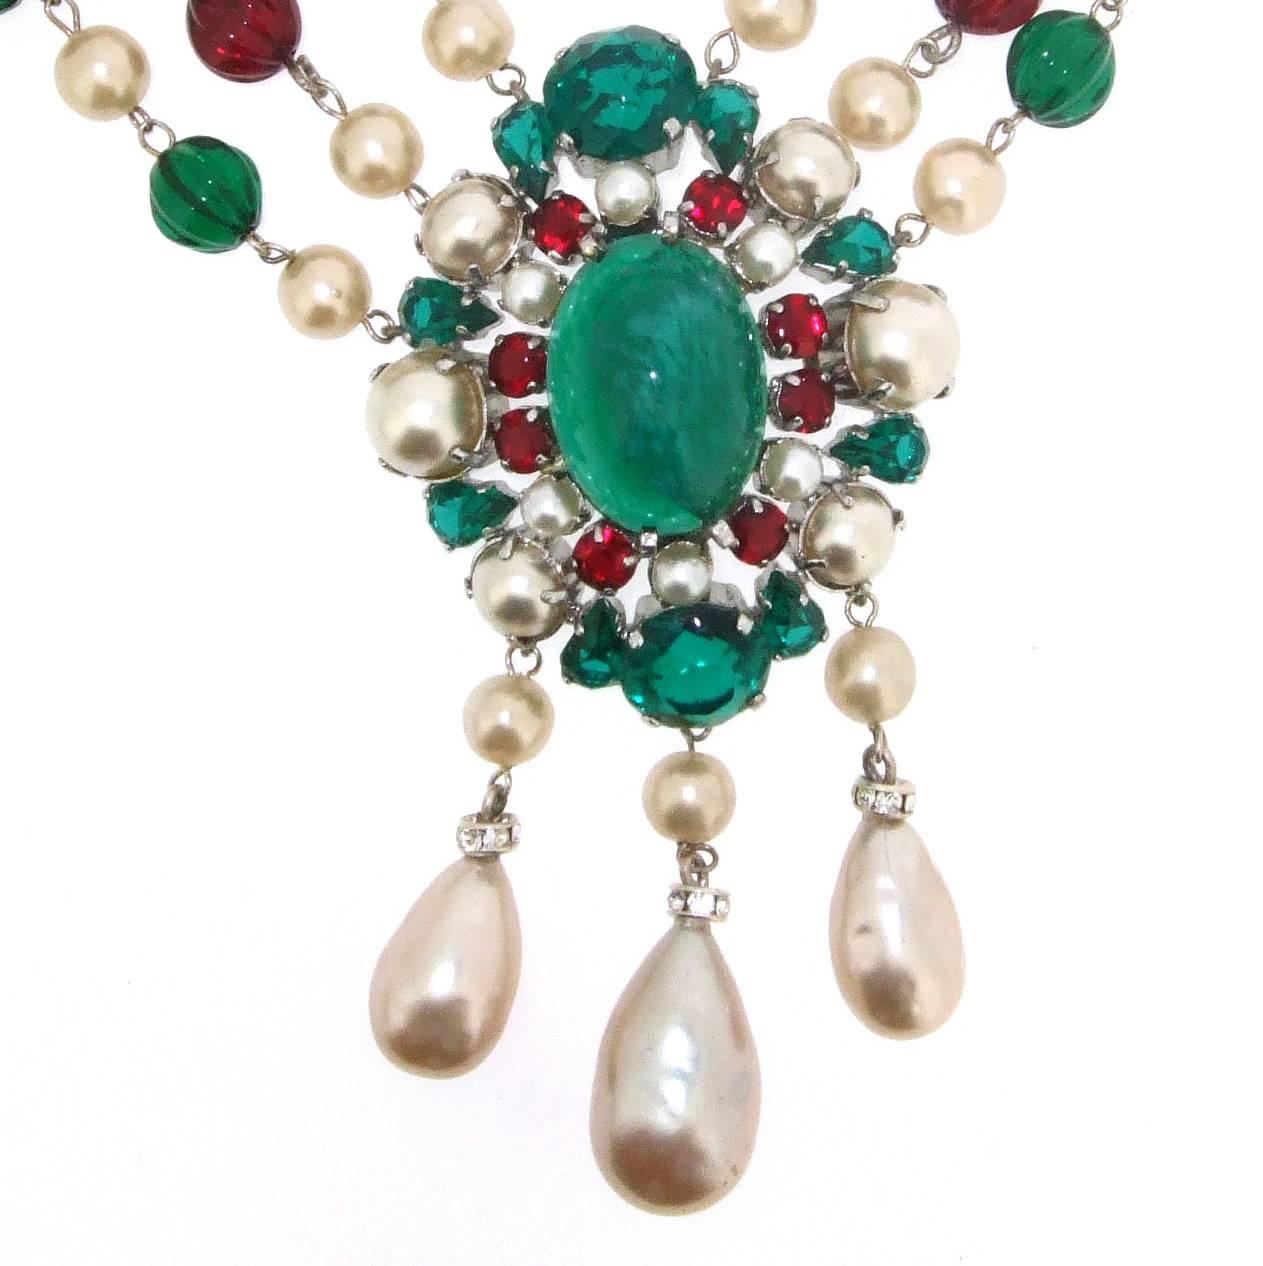 A Stunning classic Christian Dior Necklace dated 1960 featuring emerald and ruby coloured glass and glass pearls in a triple strand necklace with centre piece. The necklace length measures 18 - 20 inches. The centre piece measures 9.5cm drop by 5cm